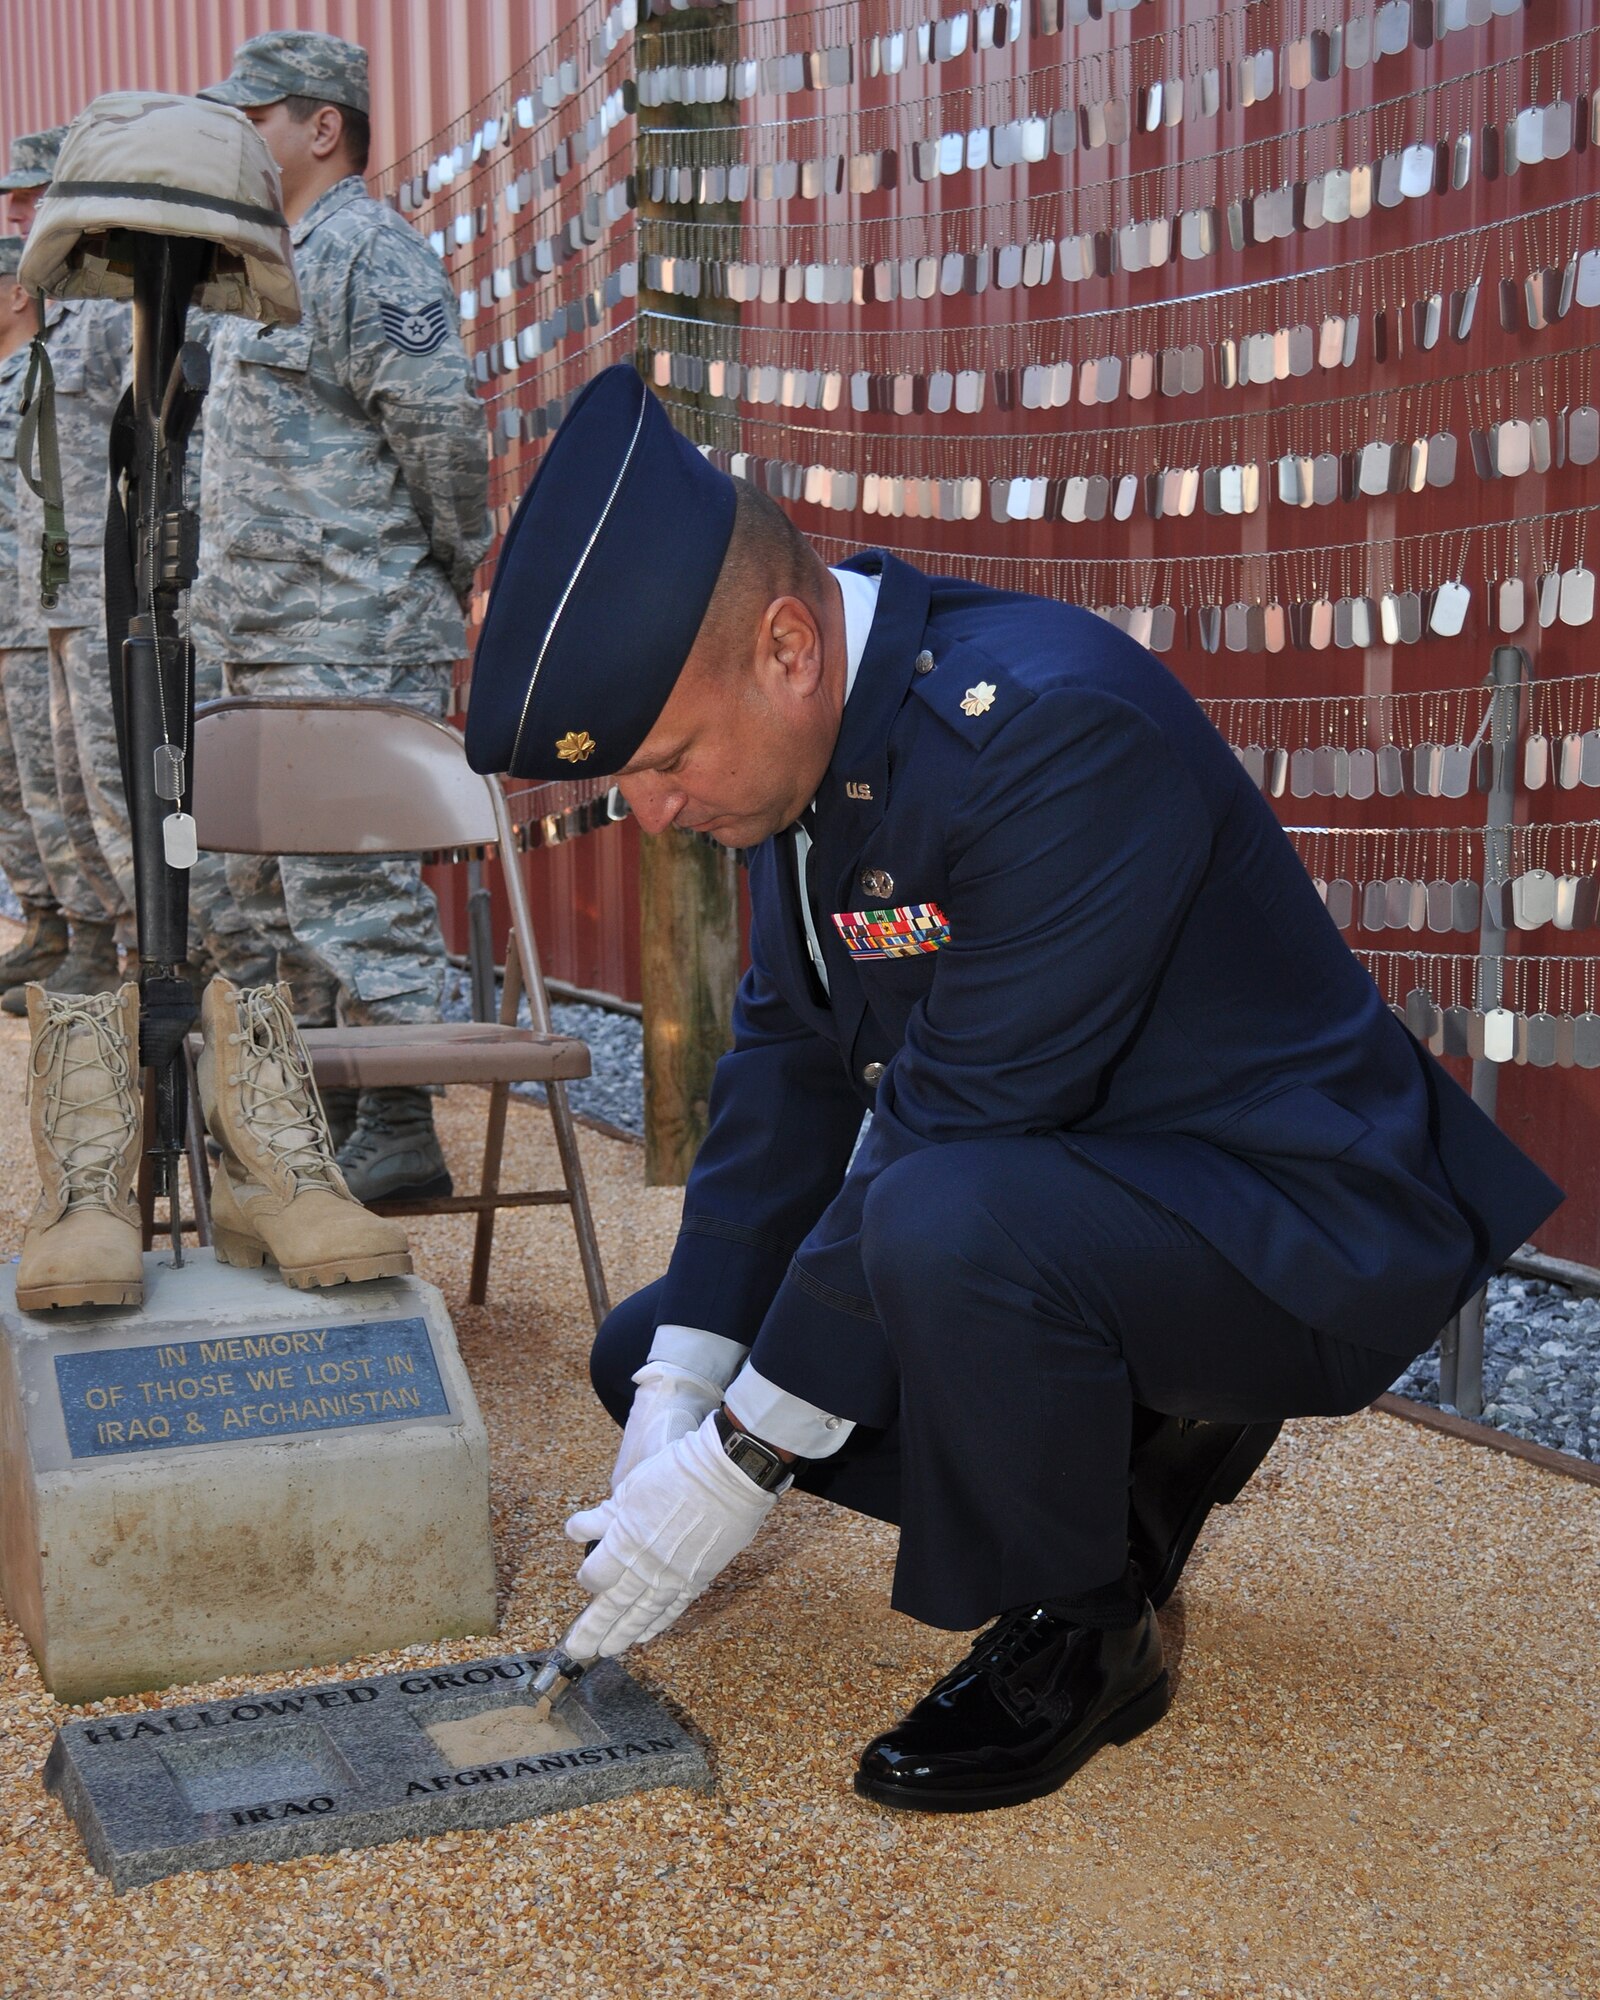 U.S. Air Force Maj. Cary Simpson, 349th Logistics Readiness Squadron plans officer, pours sand from Afghanistan onto a memorial during a ceremony at the Museum of the Forgotten Warrior outside of Beale Air Force Base, Calif., Nov. 10, 2011. The memorial was built to honor all of the servicemembers who have been killed during the Iraq and Afghanistan Wars as of October 30, 2011, containing over 6296 individual dog tags.  (U.S. Air Force photo by Staff Sgt. Jonathan Fowler/Released)